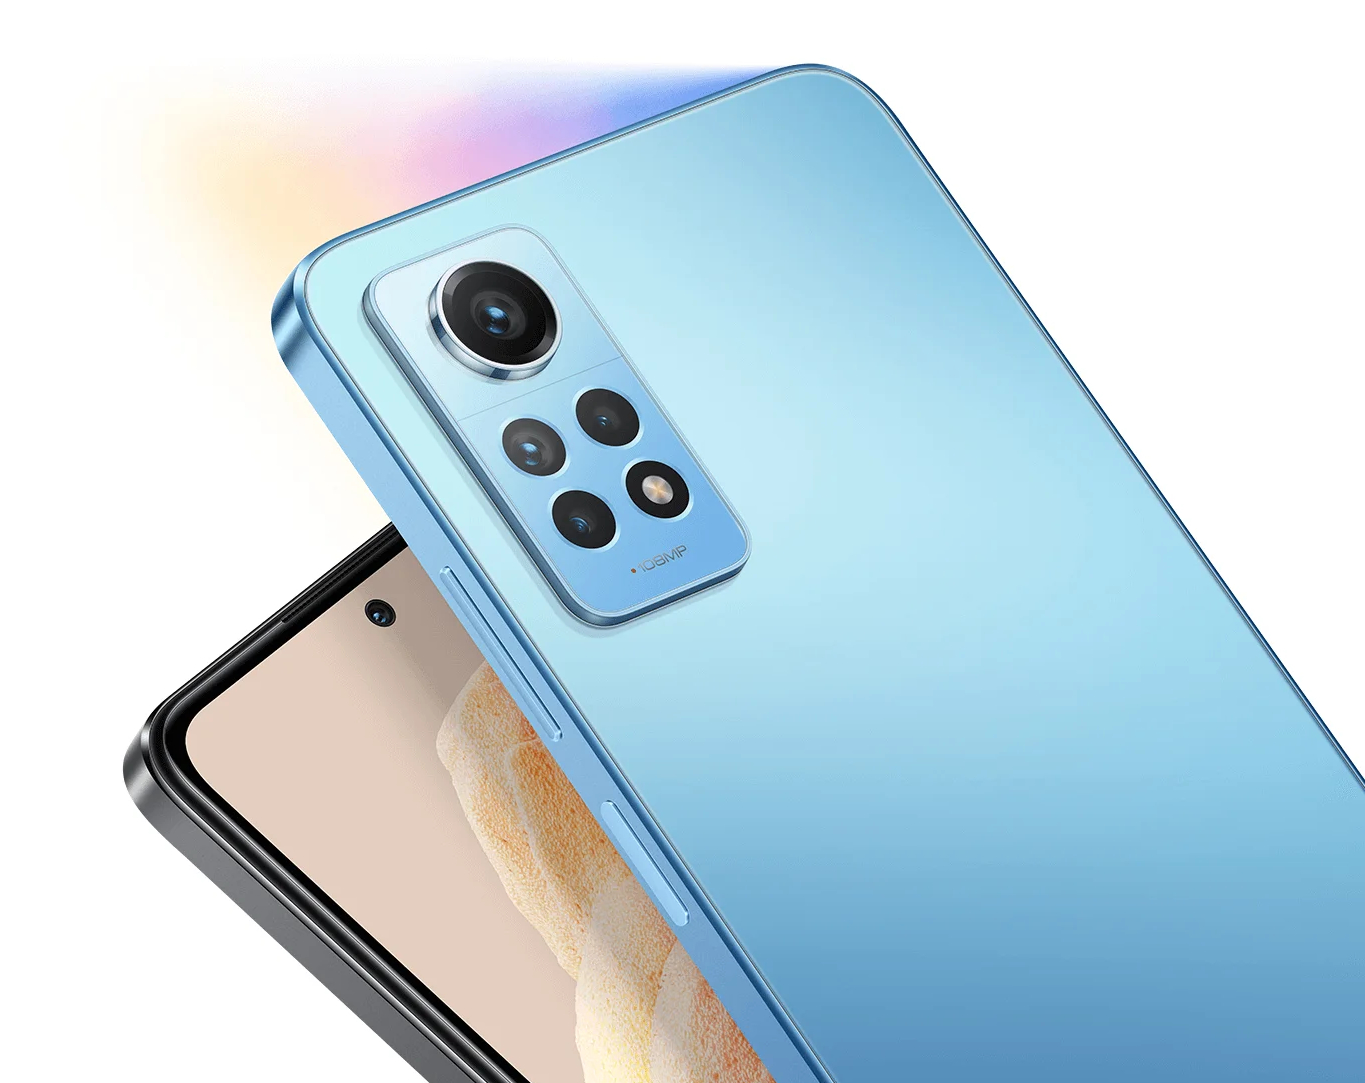 Xiaomi re-releases the Redmi Note 10 Pro under Redmi Note 12 Pro 4G as new  mid-range smartphone -  News